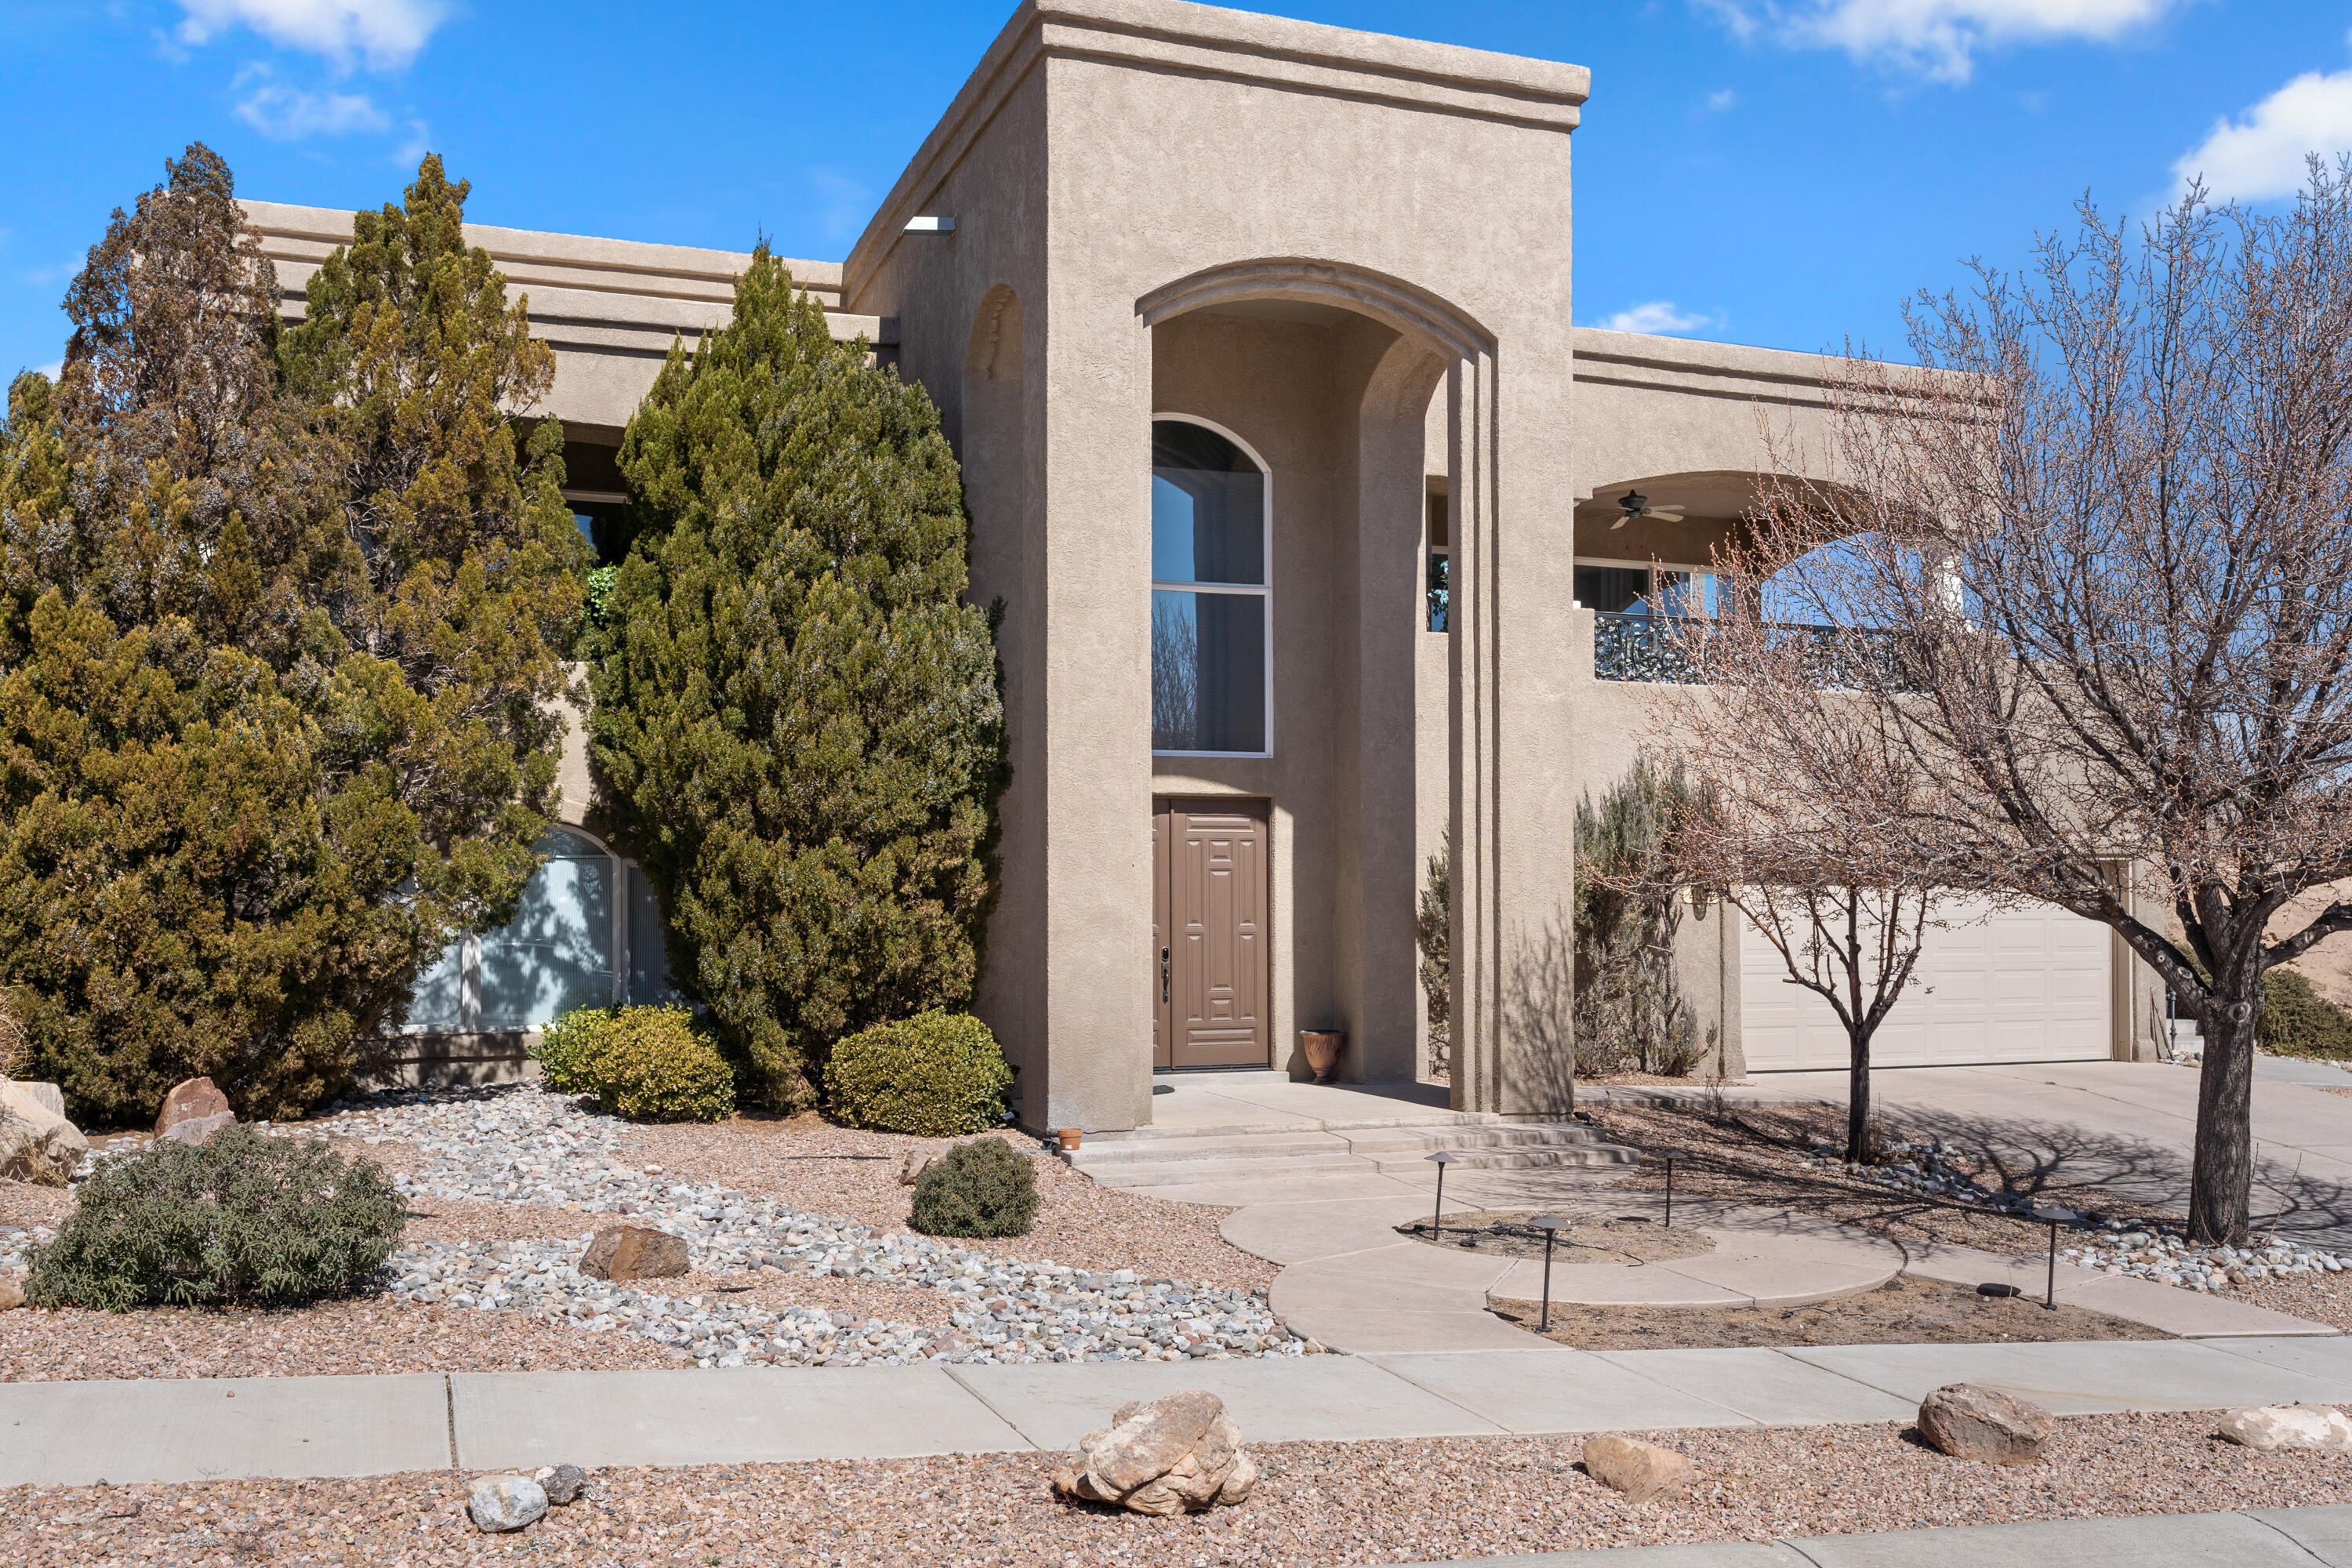 This custom-built luxury home was designed to enjoy the amazing views of Albuquerque's city lights and the Sandia Mountains. Step inside to the elegant entry way with custom iron banisters and railings, and one of two built-in display cases. Upstairs is the formal dining room, large living room with the cozy gas fireplace. Views from the double sliding glass doors display the entire city, perfect place to enjoy the Balloon Fiesta and 4th of July. In the kitchen you'll find all stainless-steel appliances, downdraft cooktop and granite counters. All bedrooms have full bathrooms with walk in showers and large walk-in closets.Downstairs you will enjoy the 3rd bedroom with private bathroom and walk in closet.